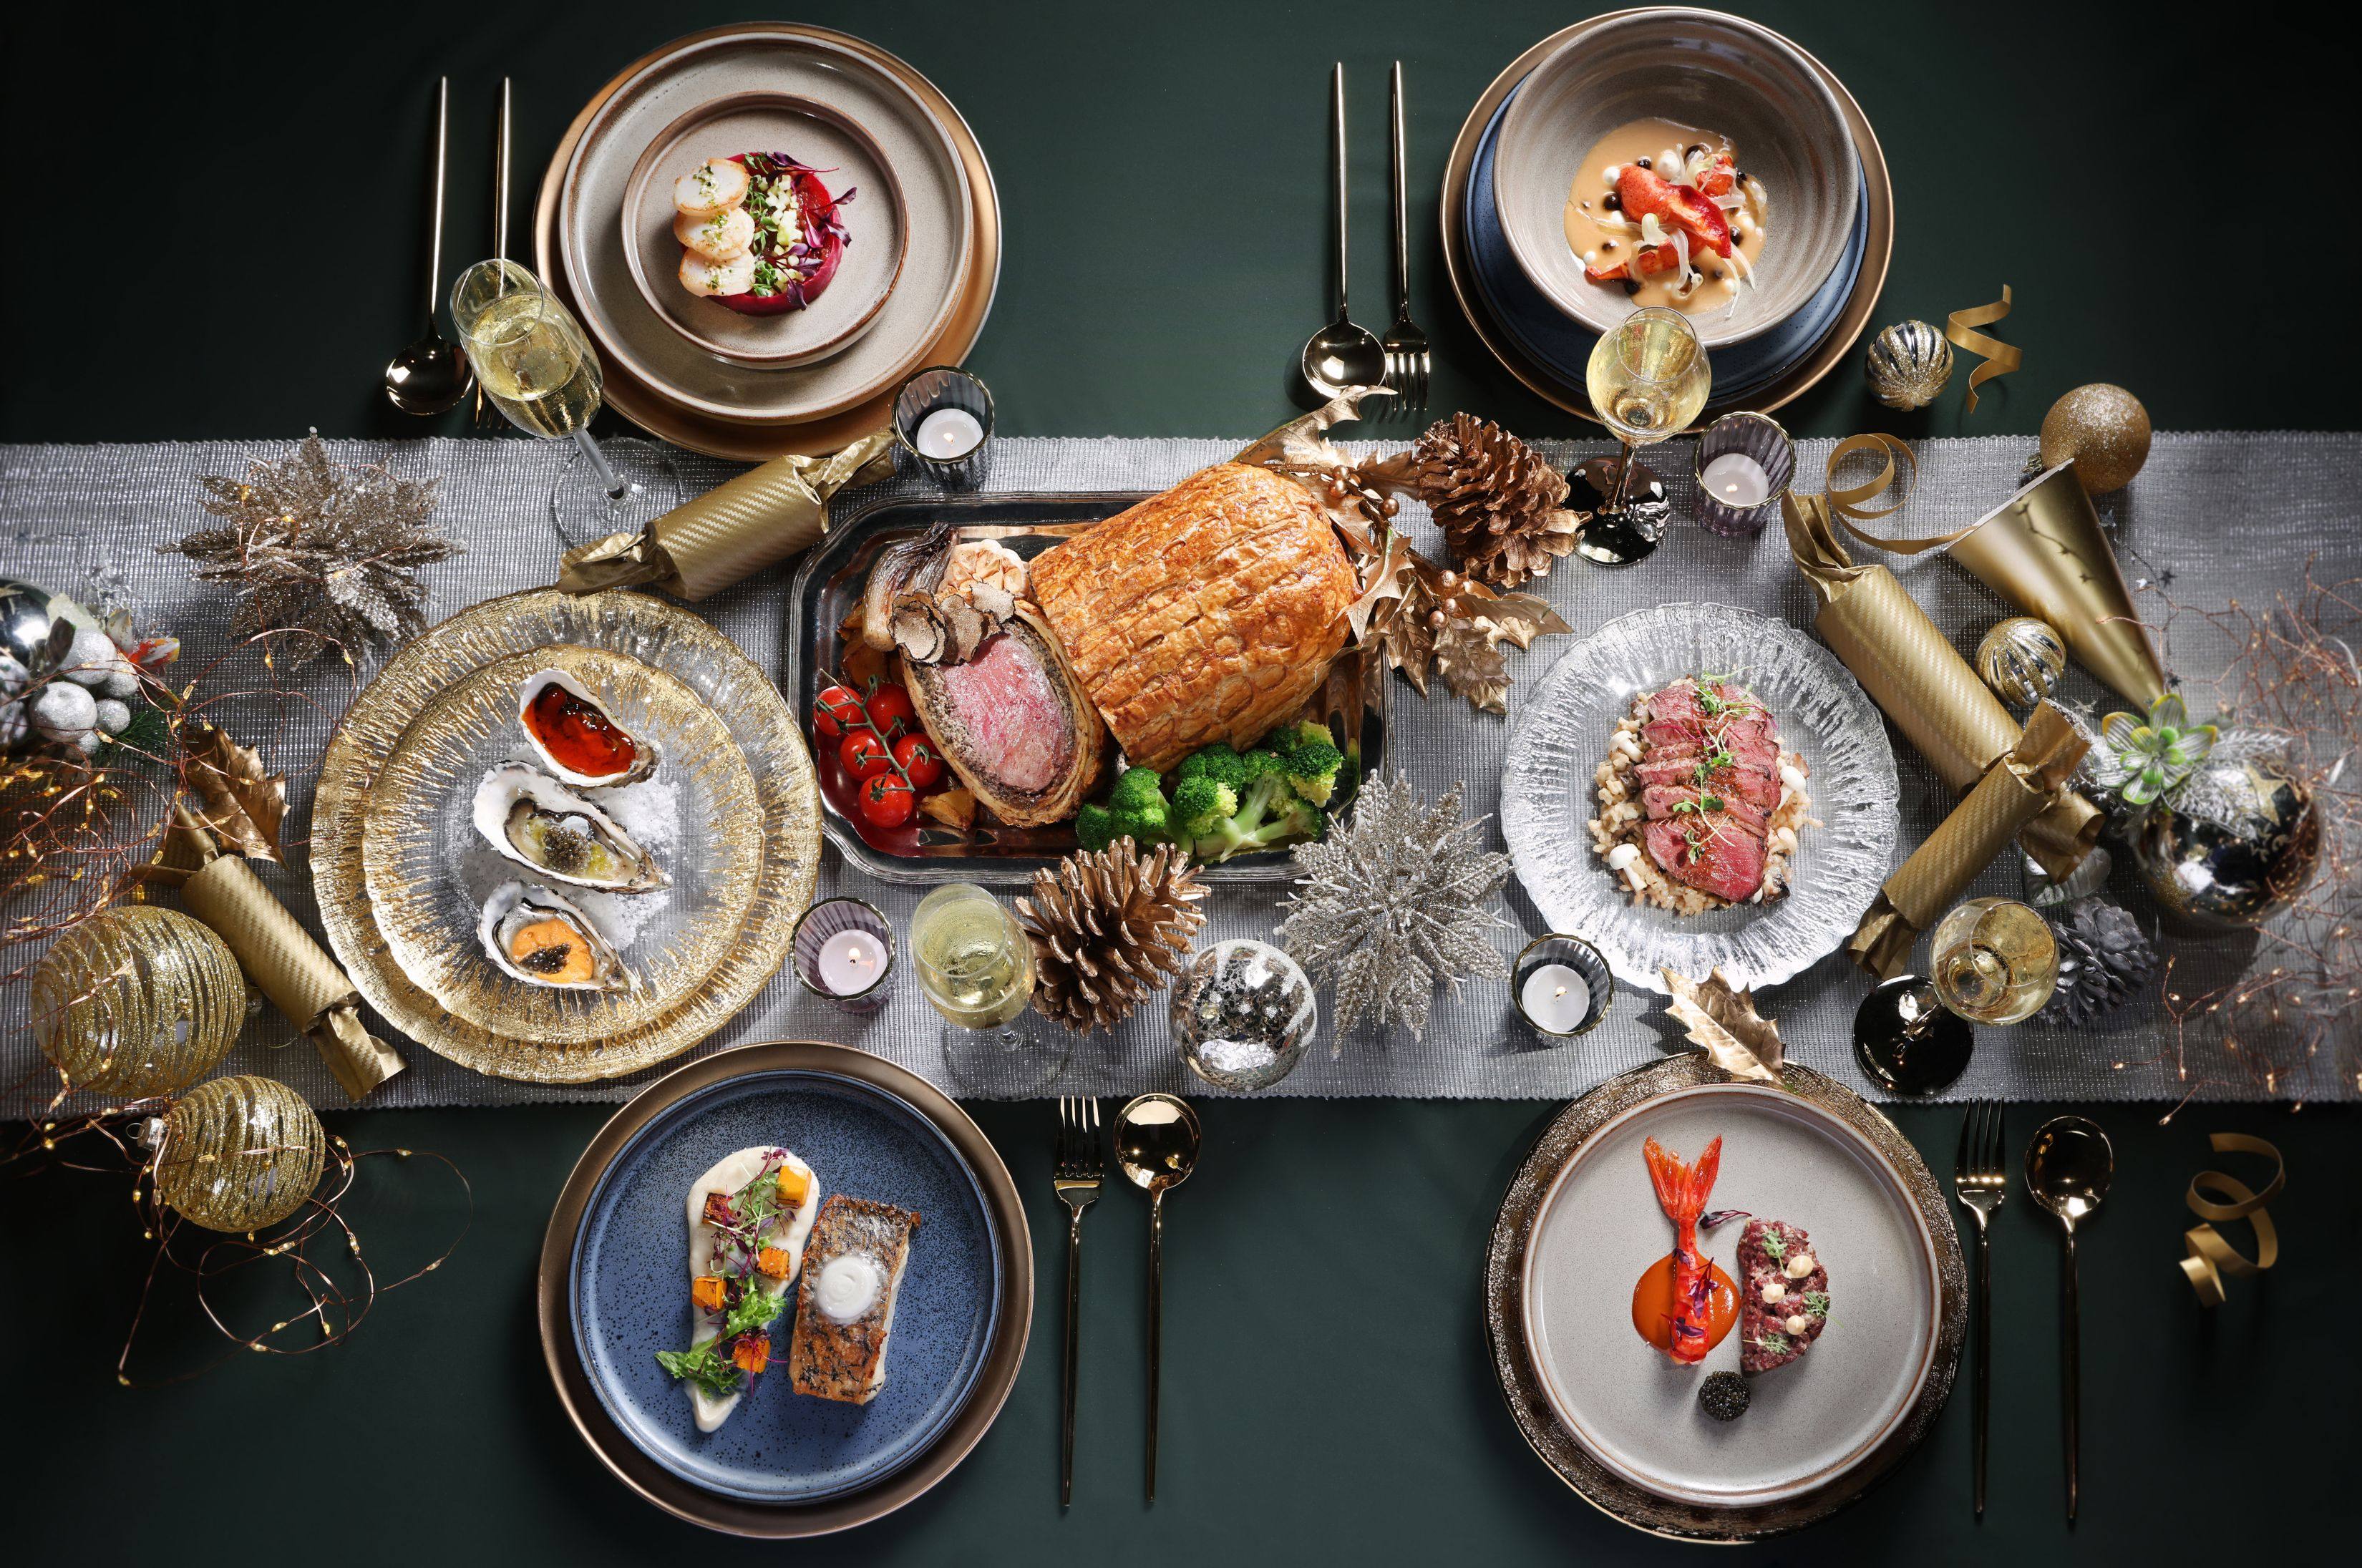 A festive dinner spread from Sunset Grill. Photo: Sheraton Hong Kong Tung Chung Hotel